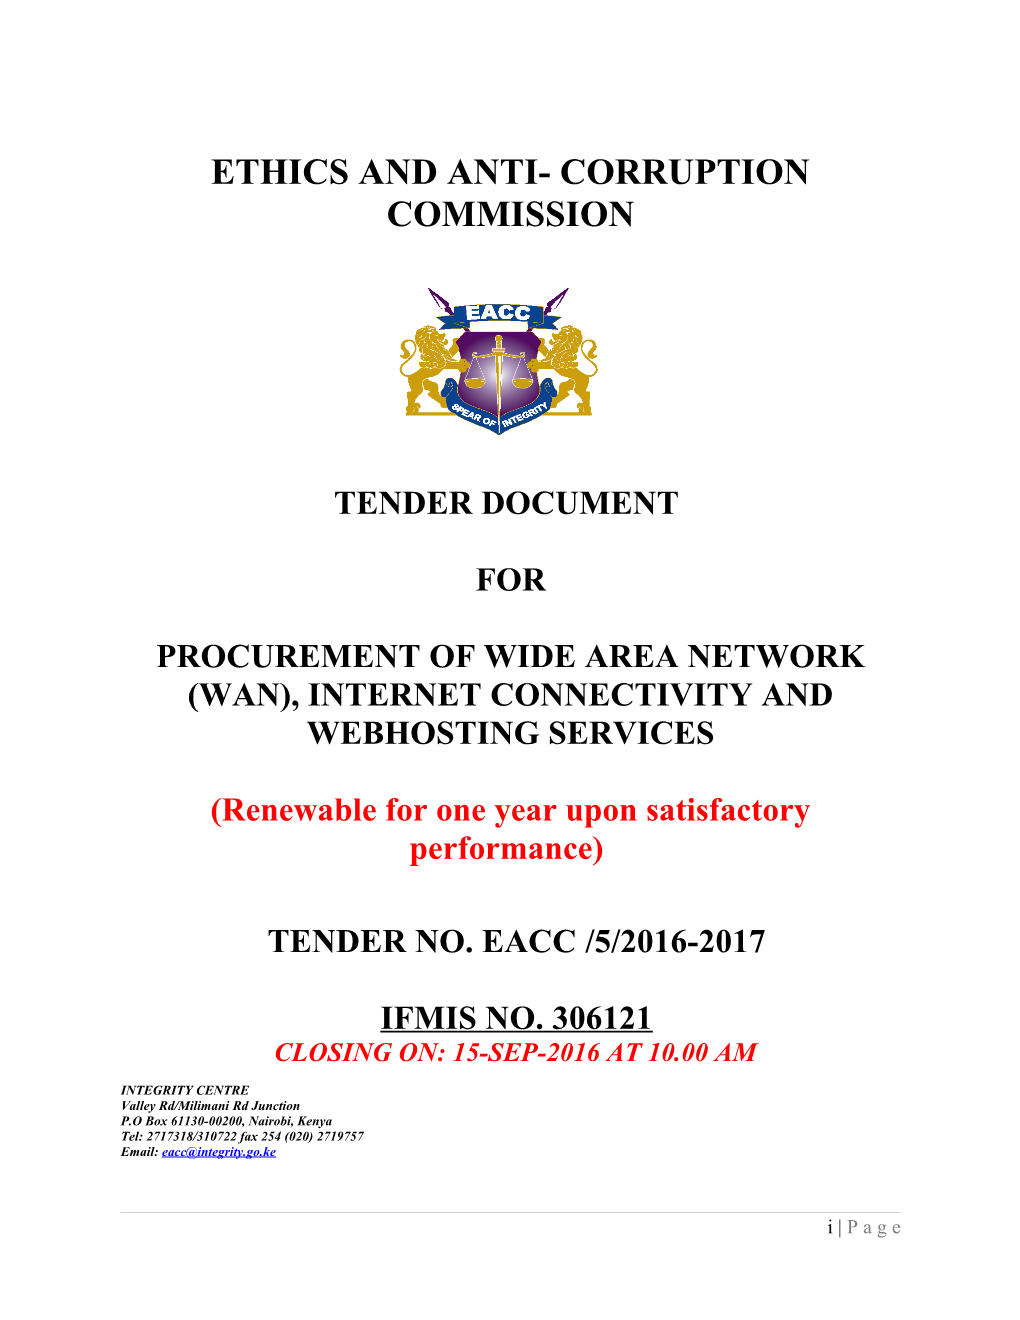 Ethics and Anti- Corruption Commission